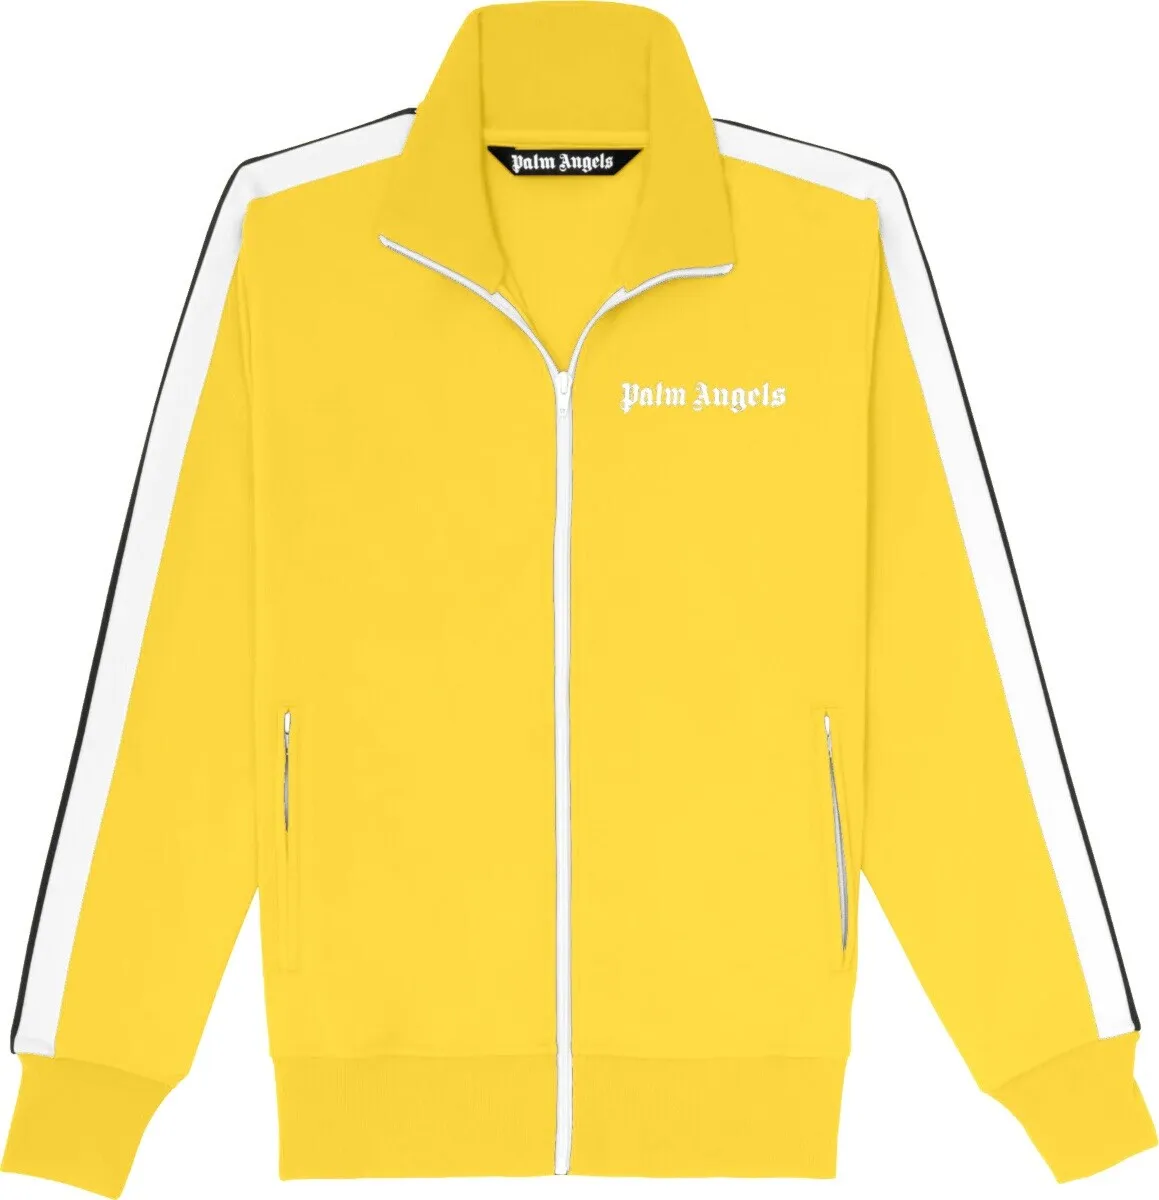 palm angels track jacket Yellow Size Small